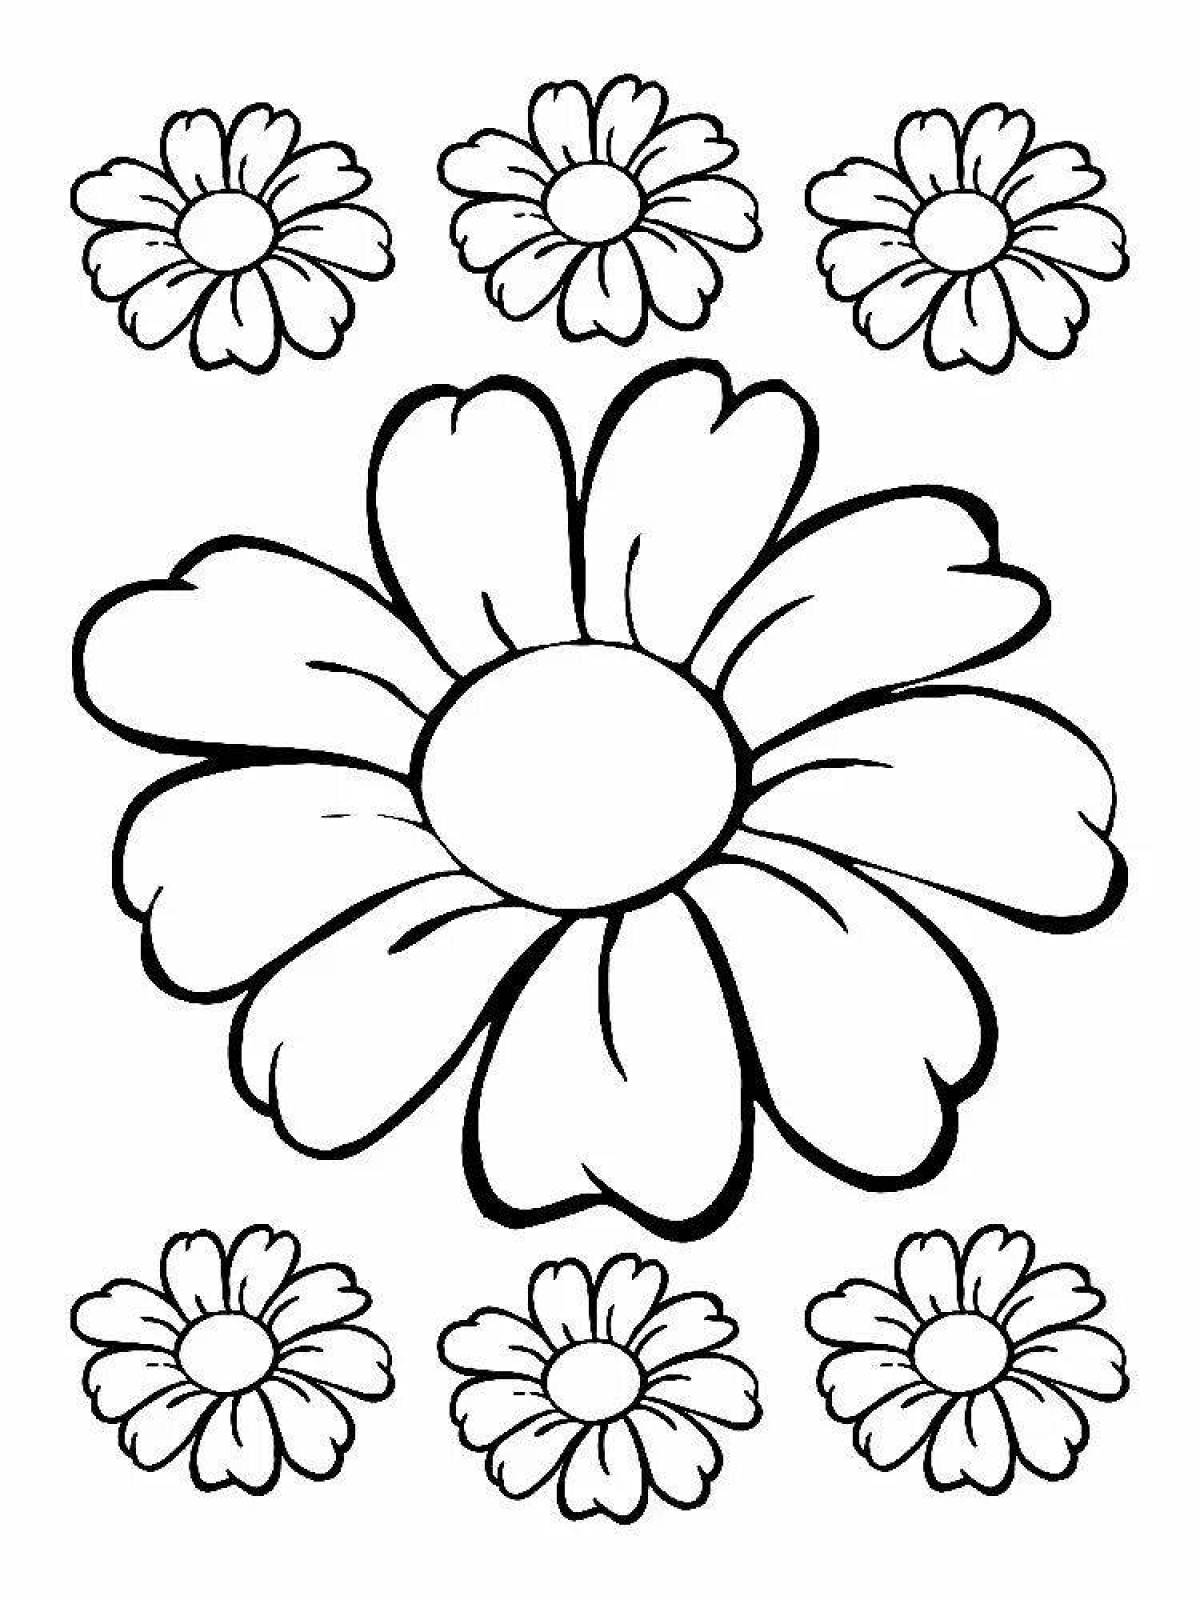 Playful chamomile flower coloring page